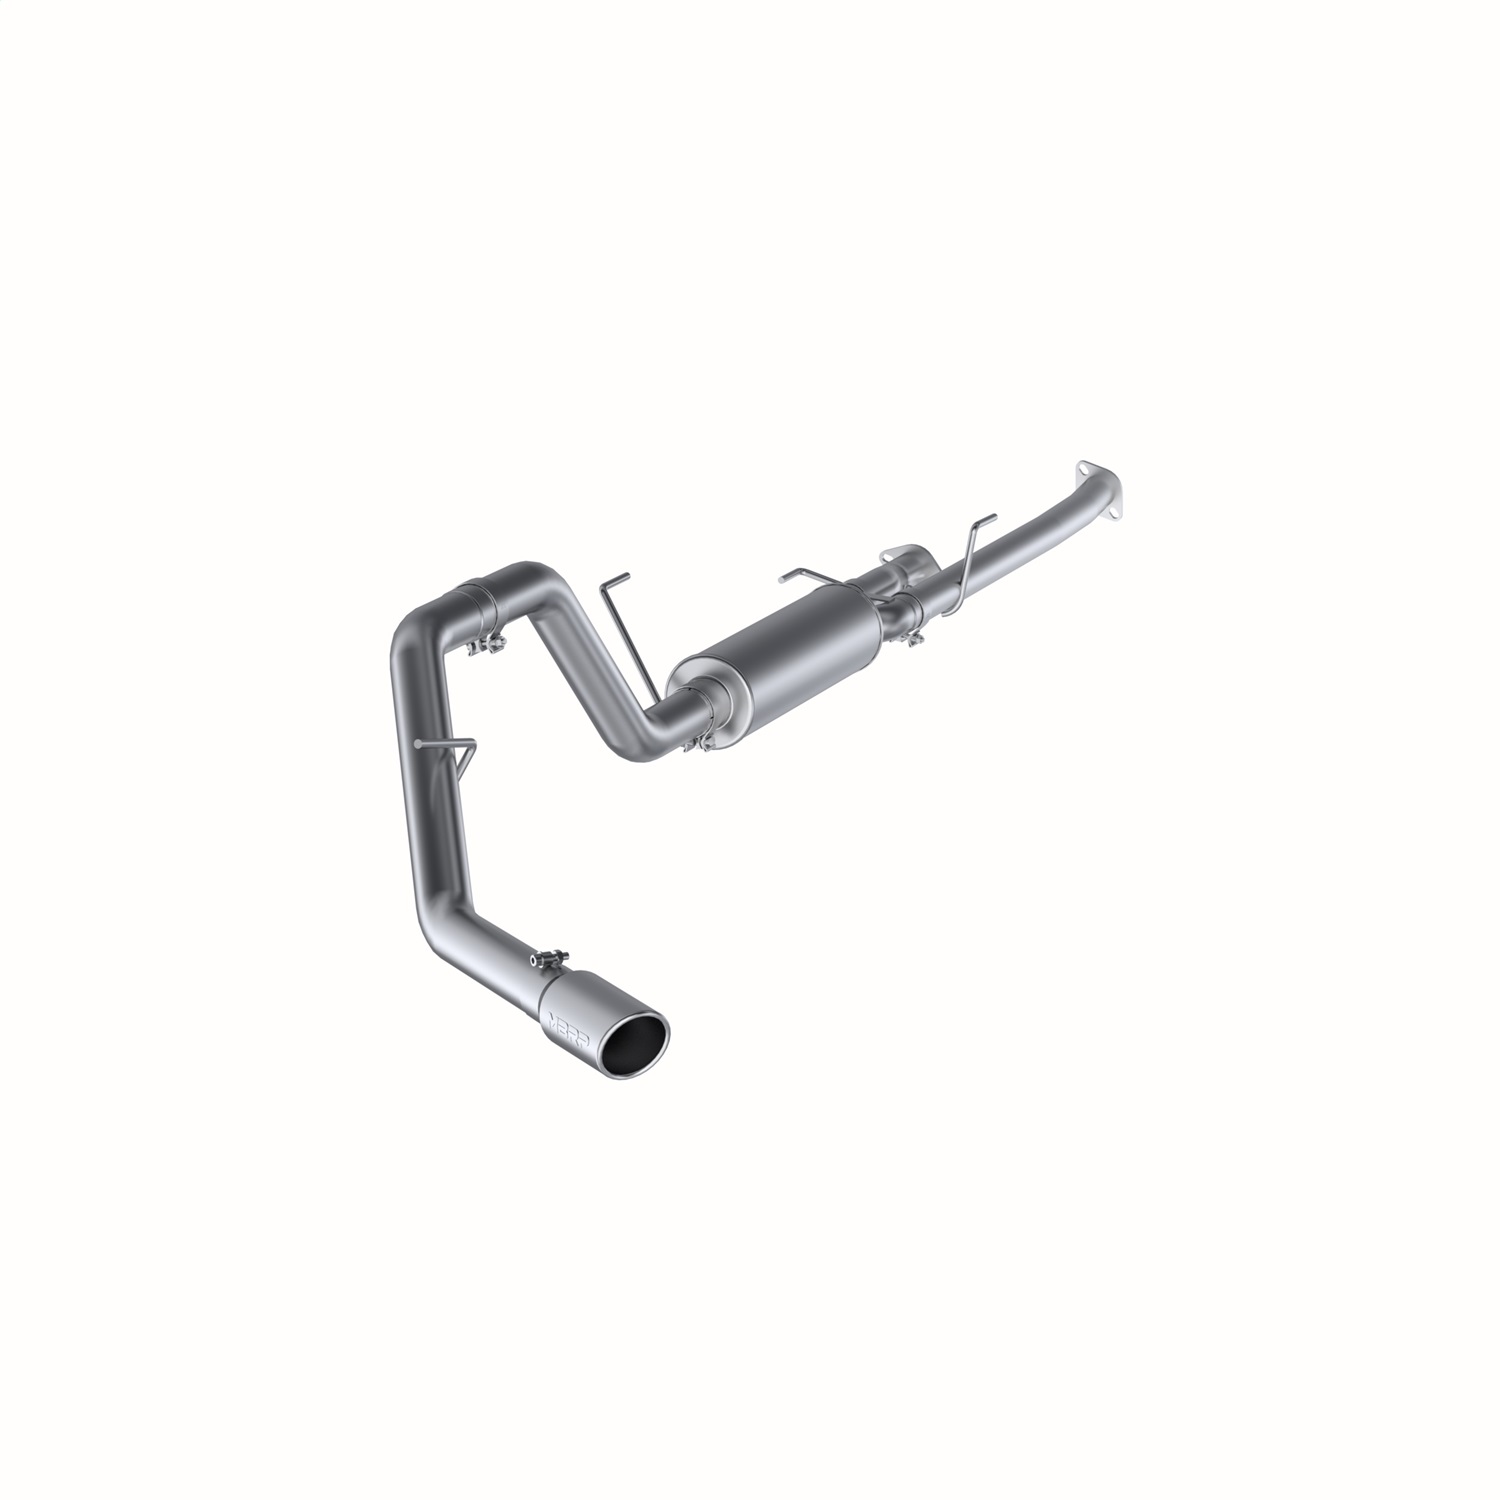 MBRP Exhaust S5314AL Armor Lite Cat Back Exhaust System Fits 09-21 Tundra